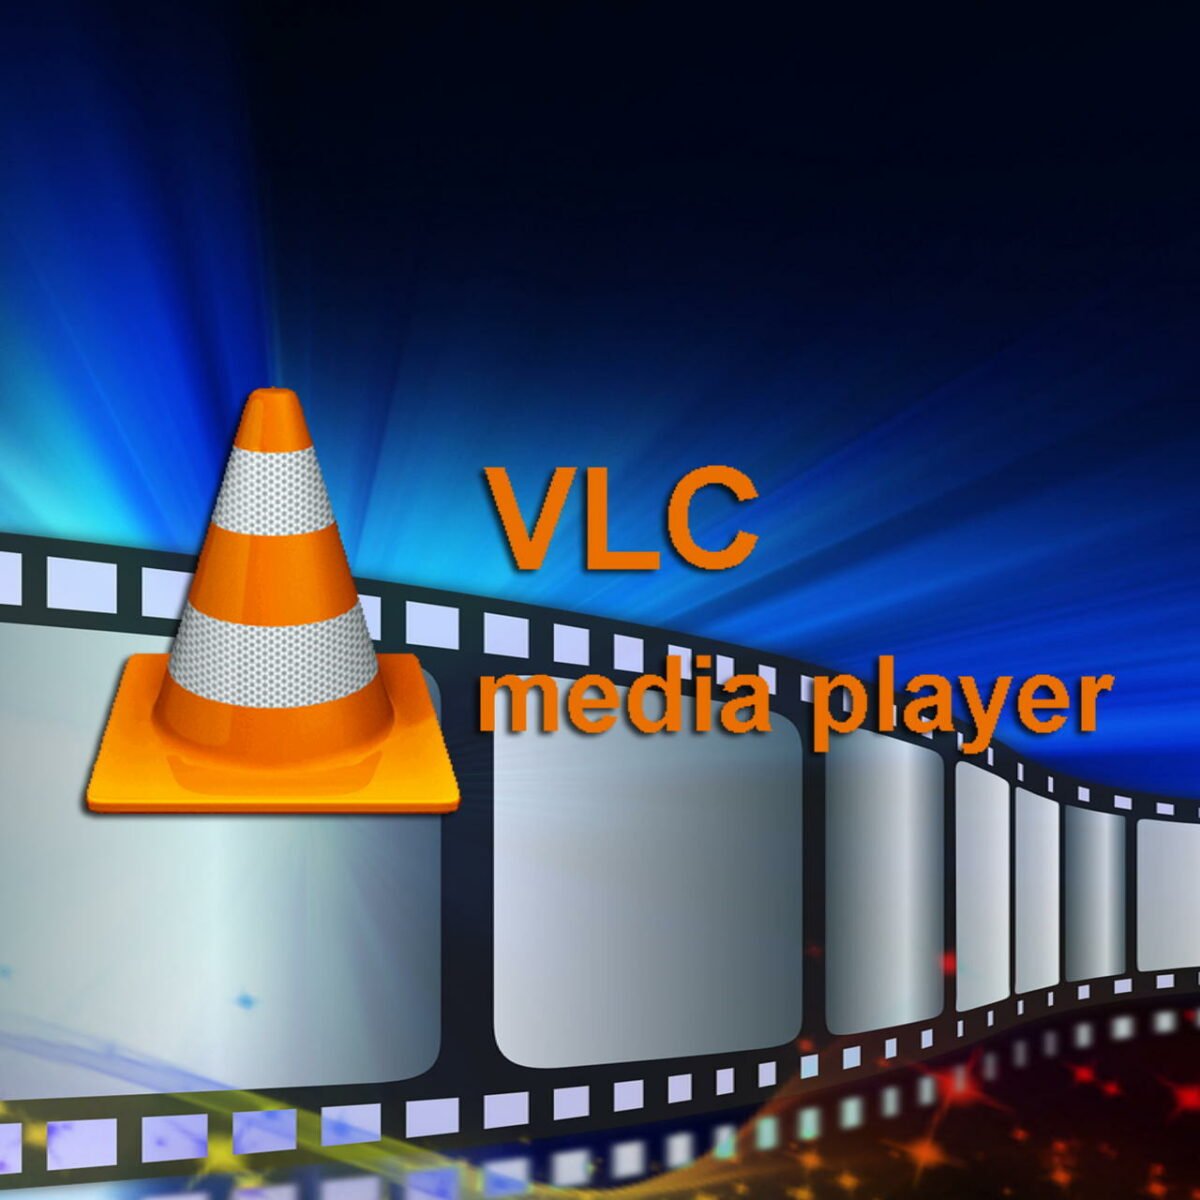 download vlc media player pc